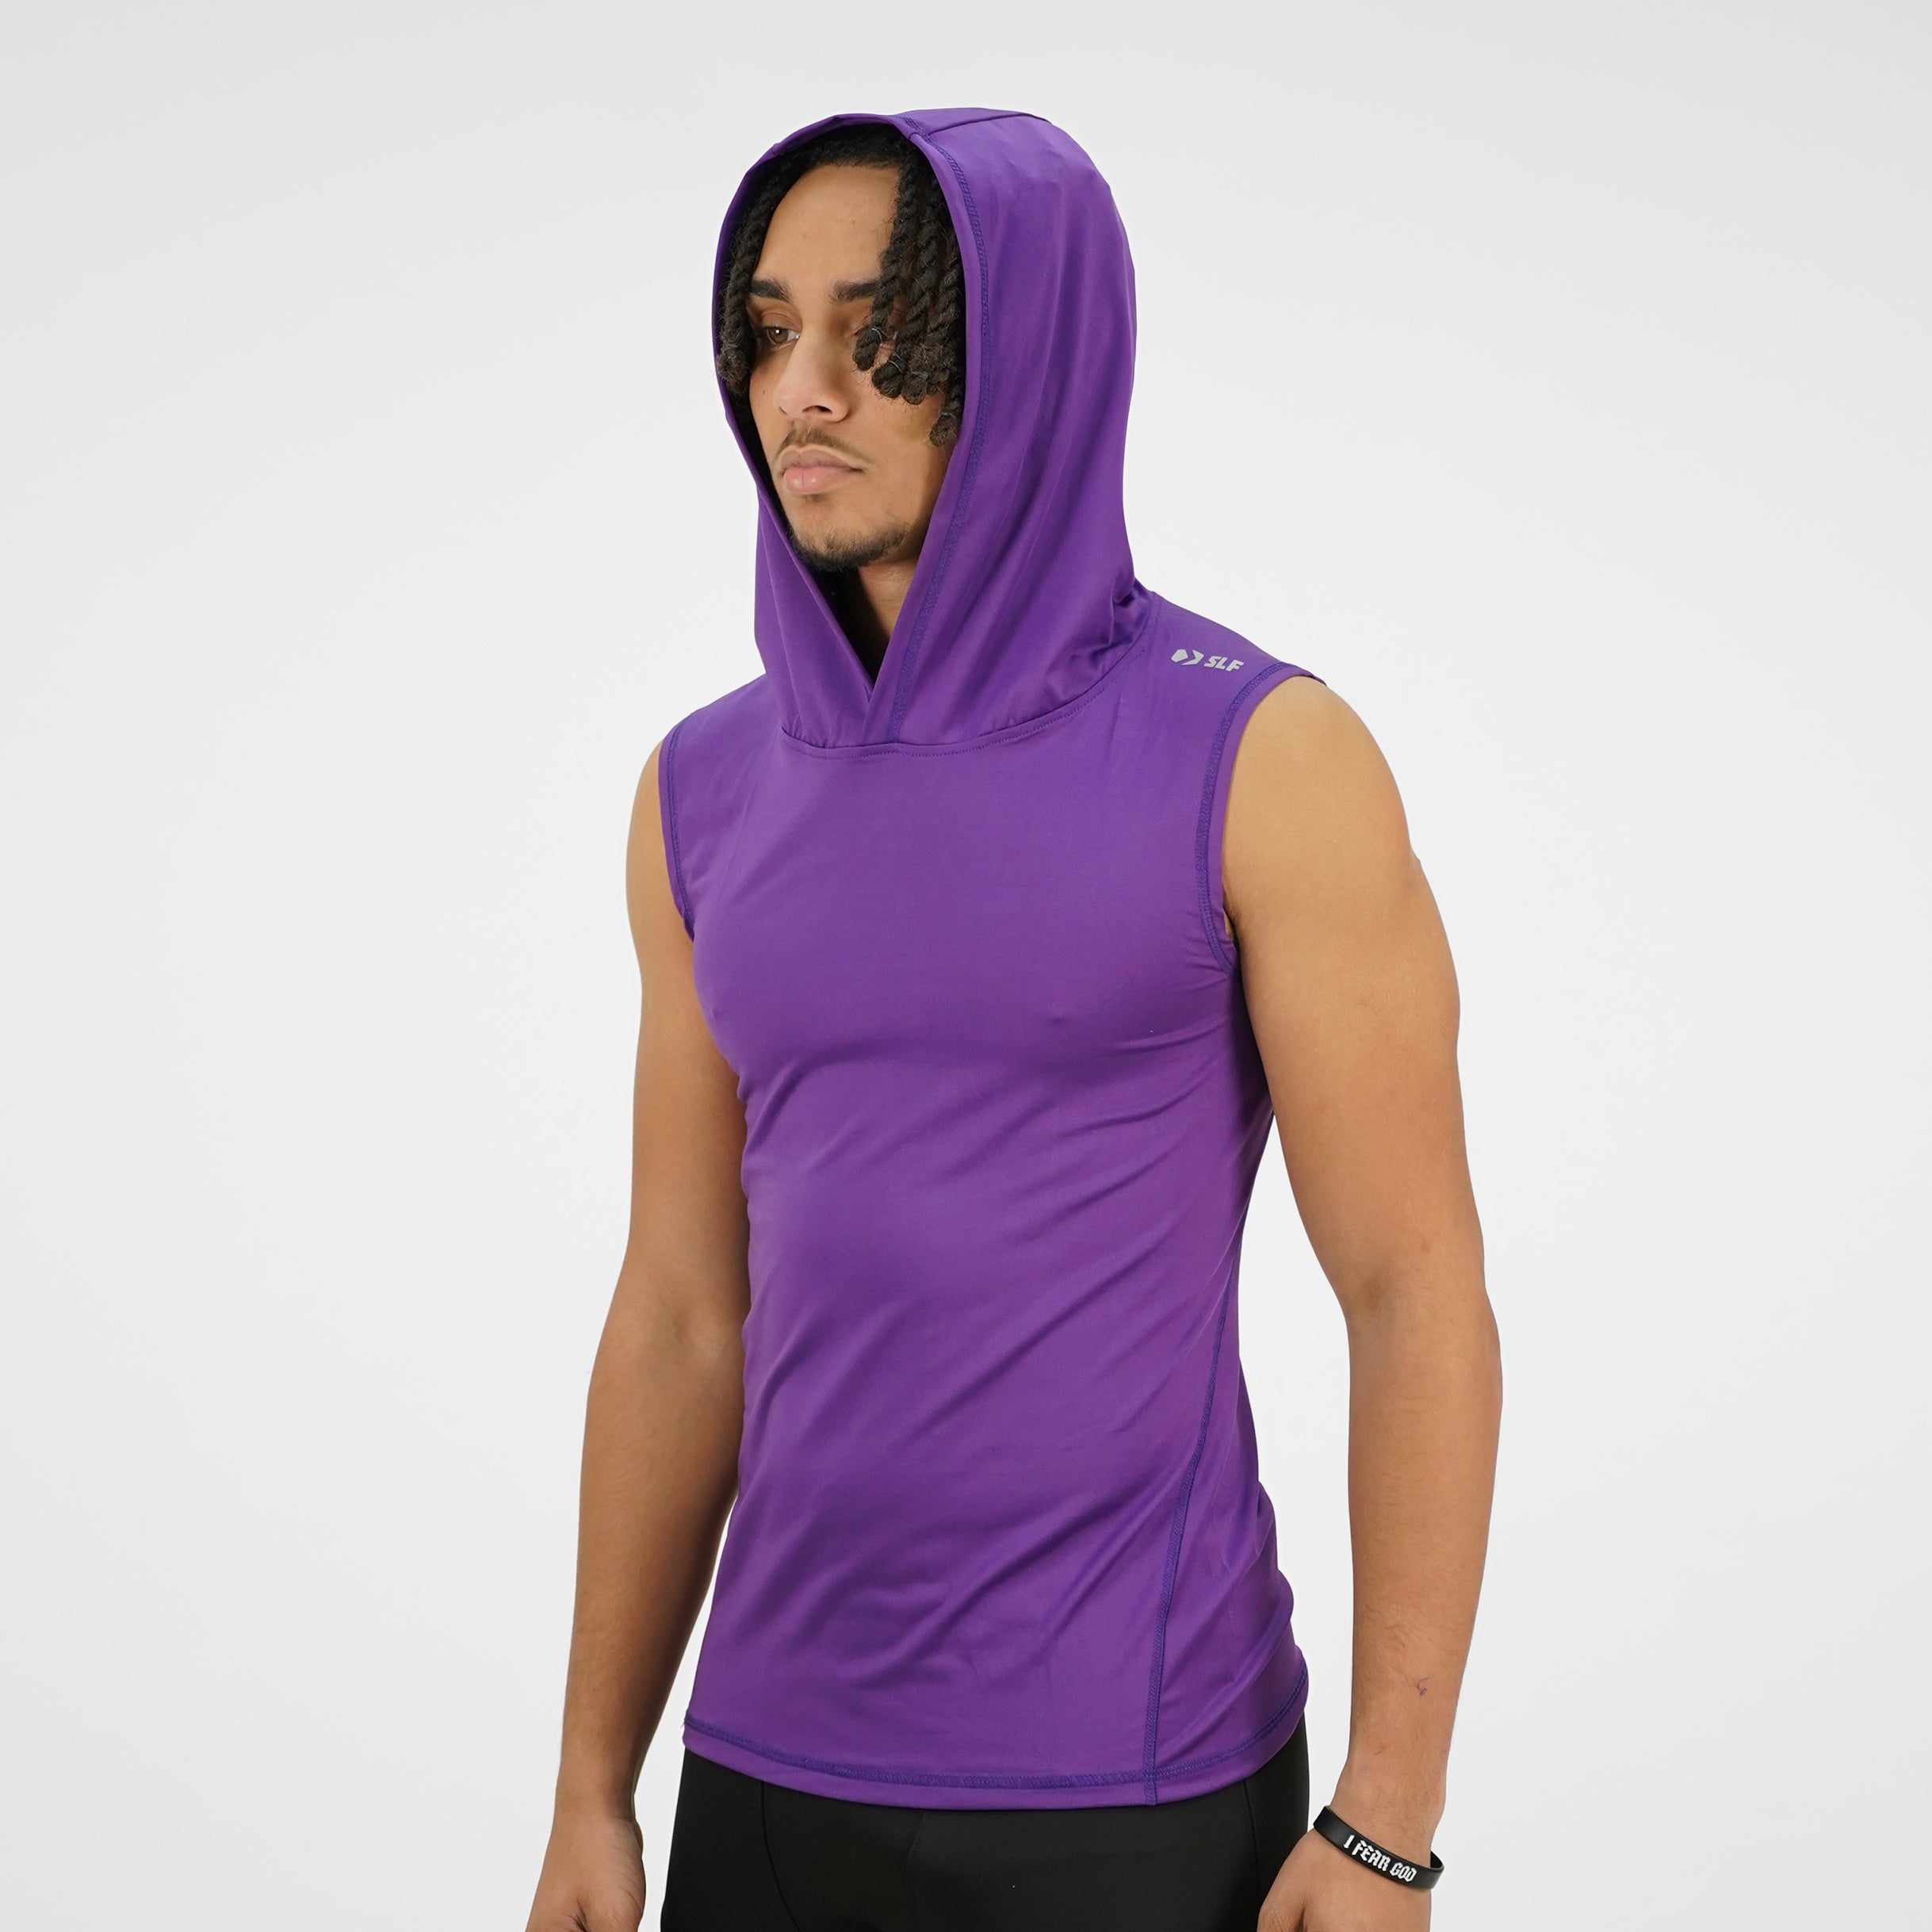 The perfect sleeveless compression shirt that won't disappoint